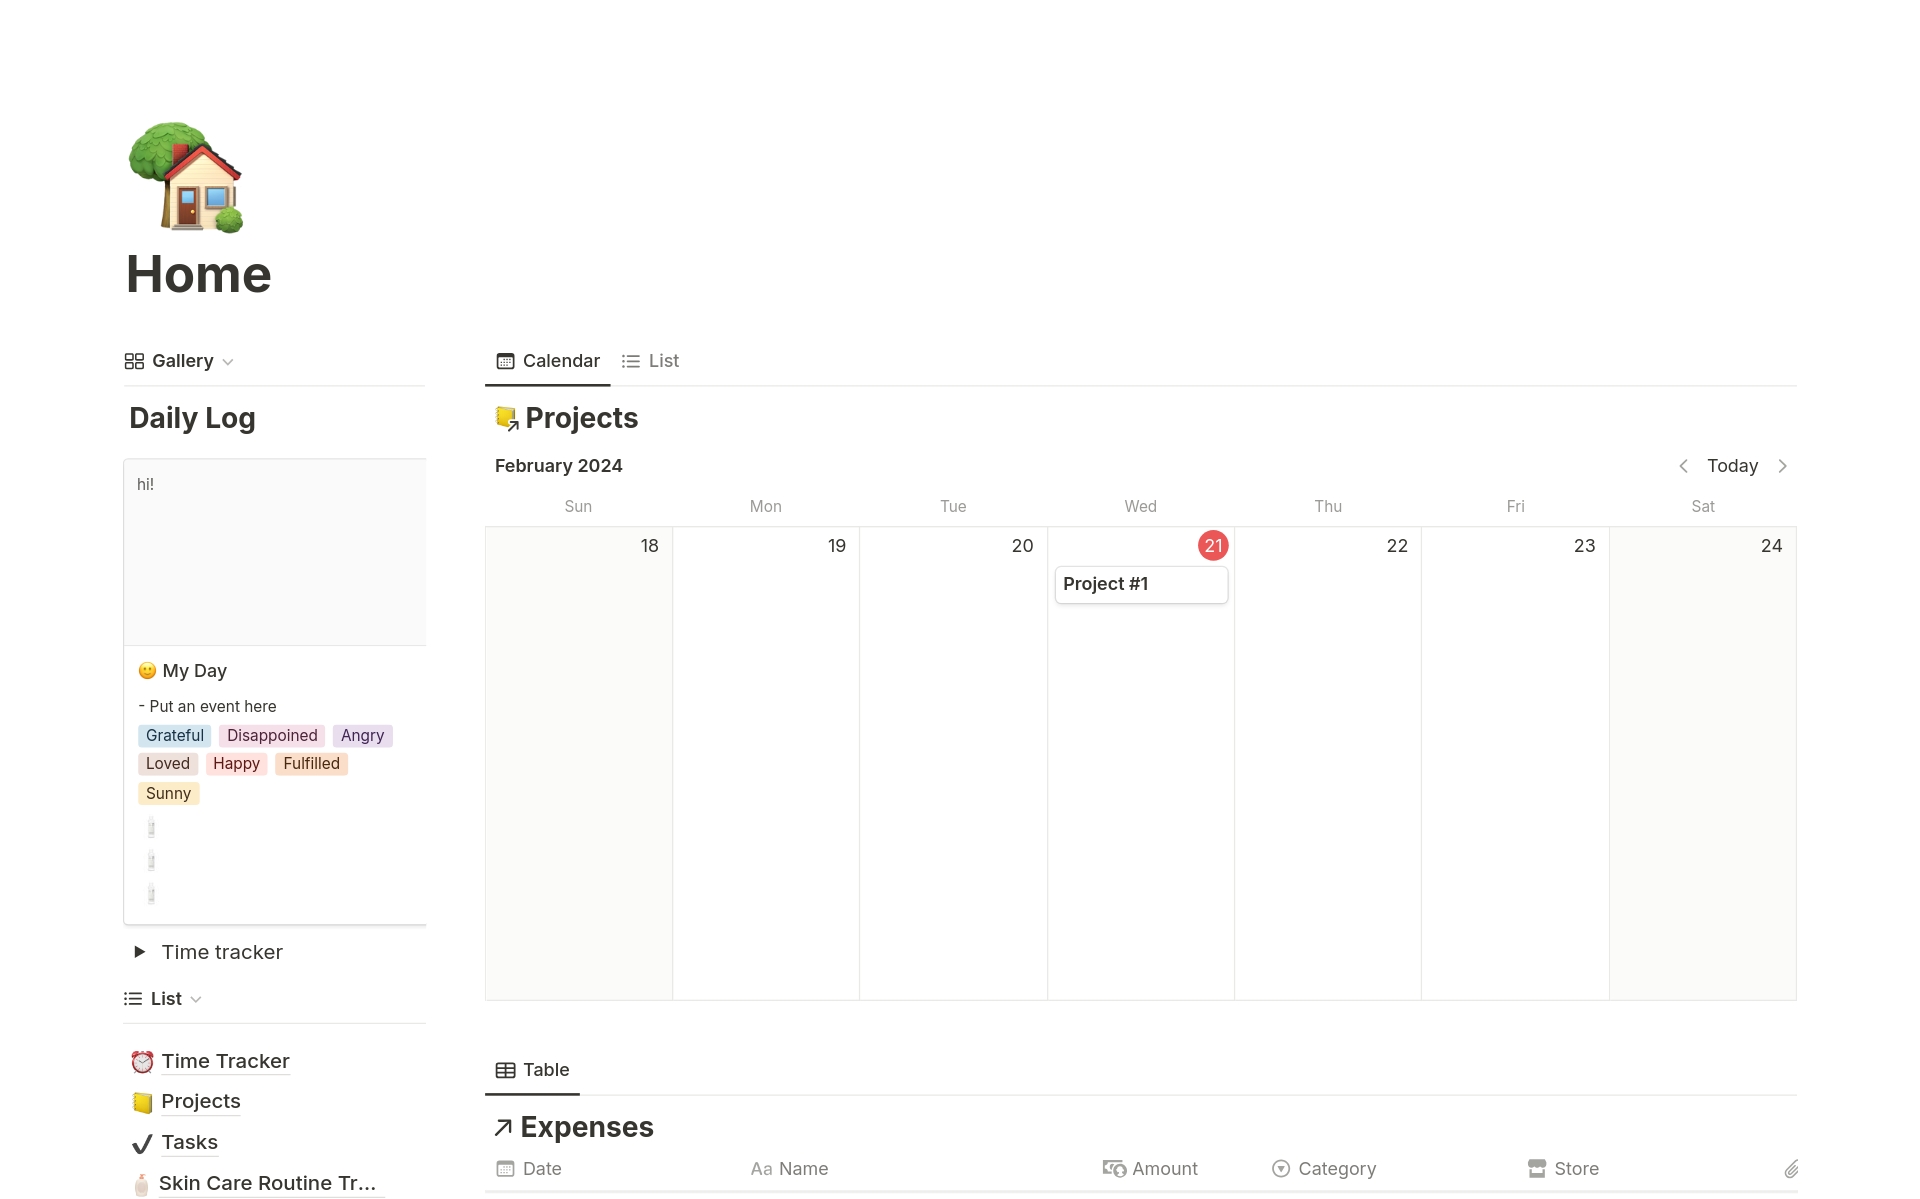 This set up includes:
- 6 databases (daily notes, expenses, time tracker, projects, task tracker, expense tracker)
- Linking to Notion Calendar
- Tutorial via Loom